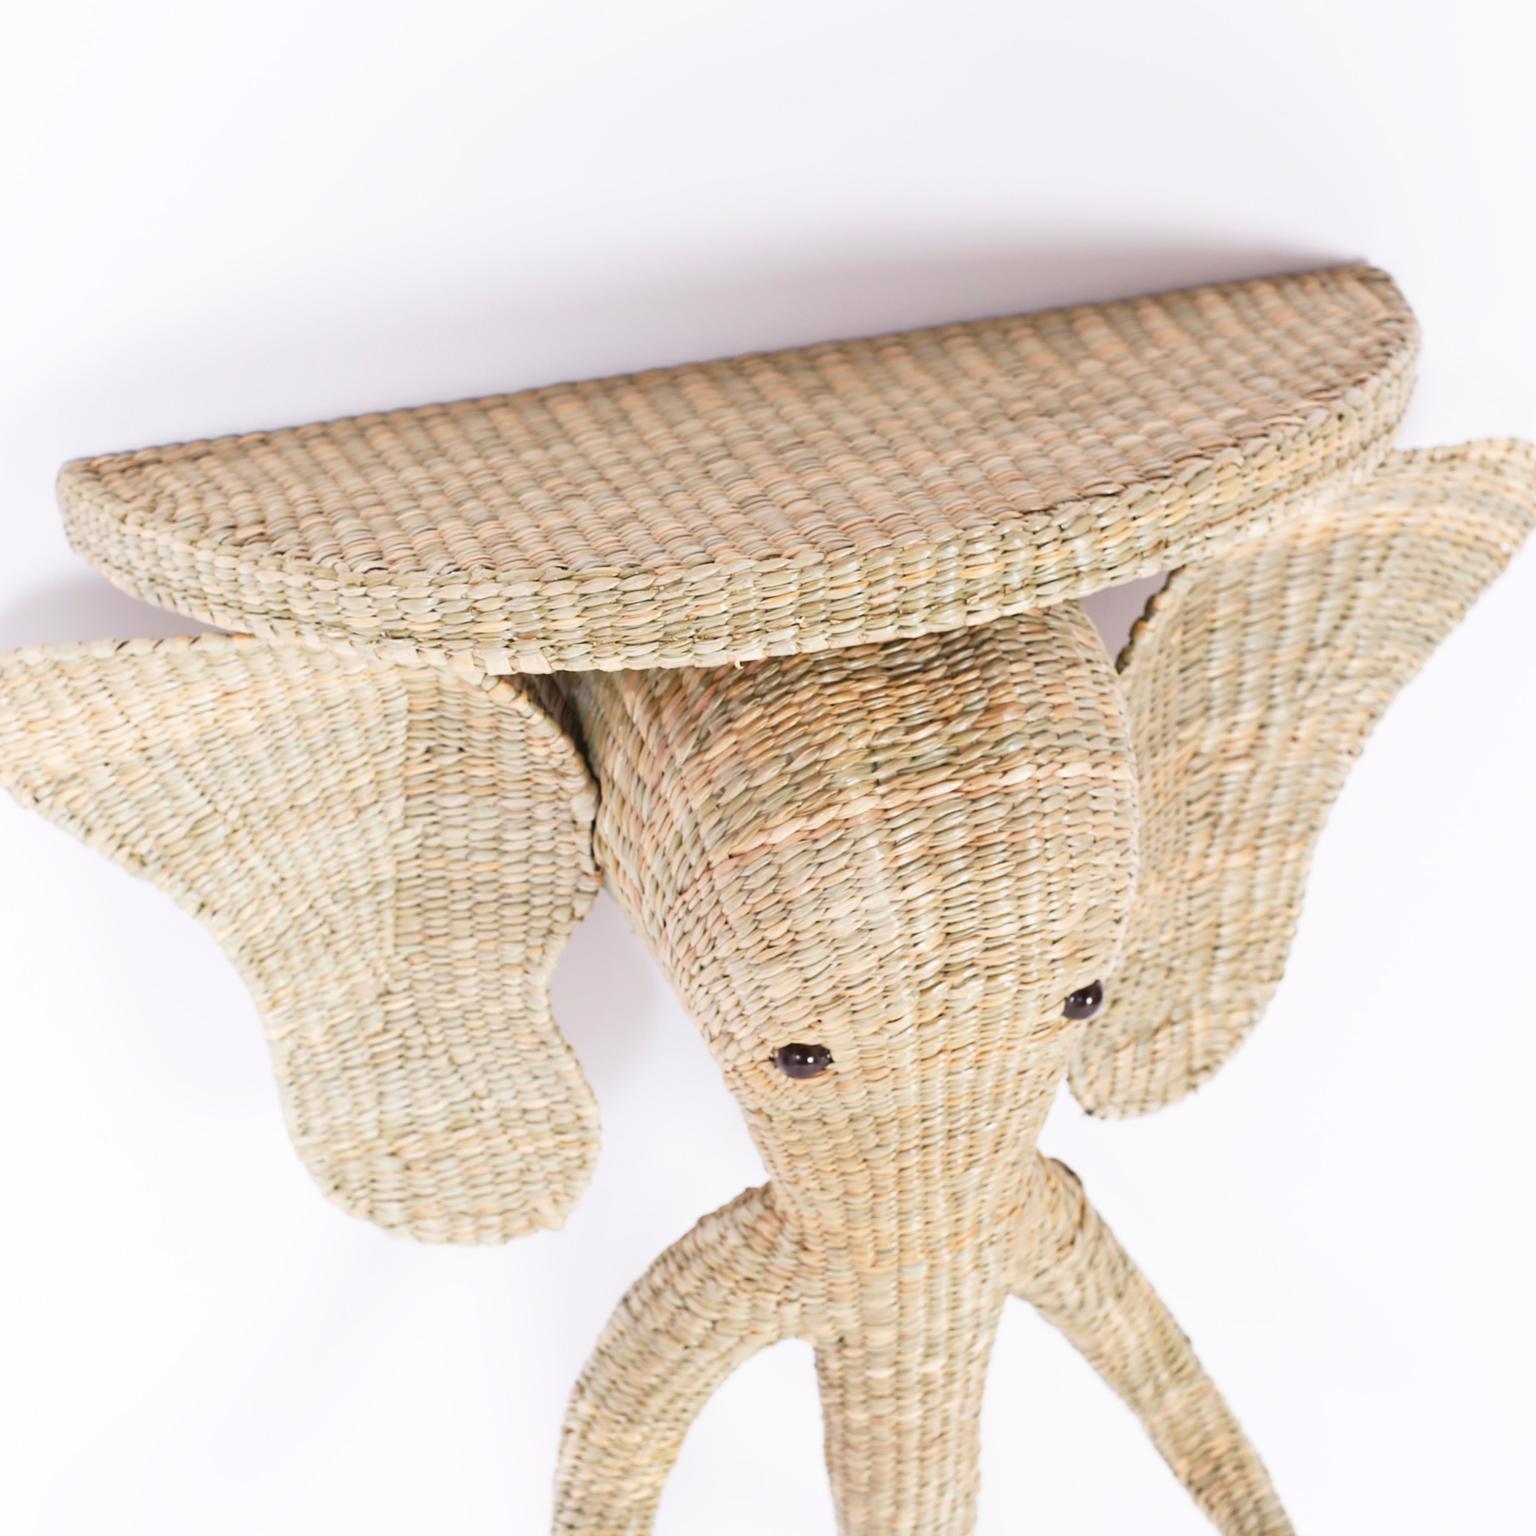 Mexican Wicker Elephant Console